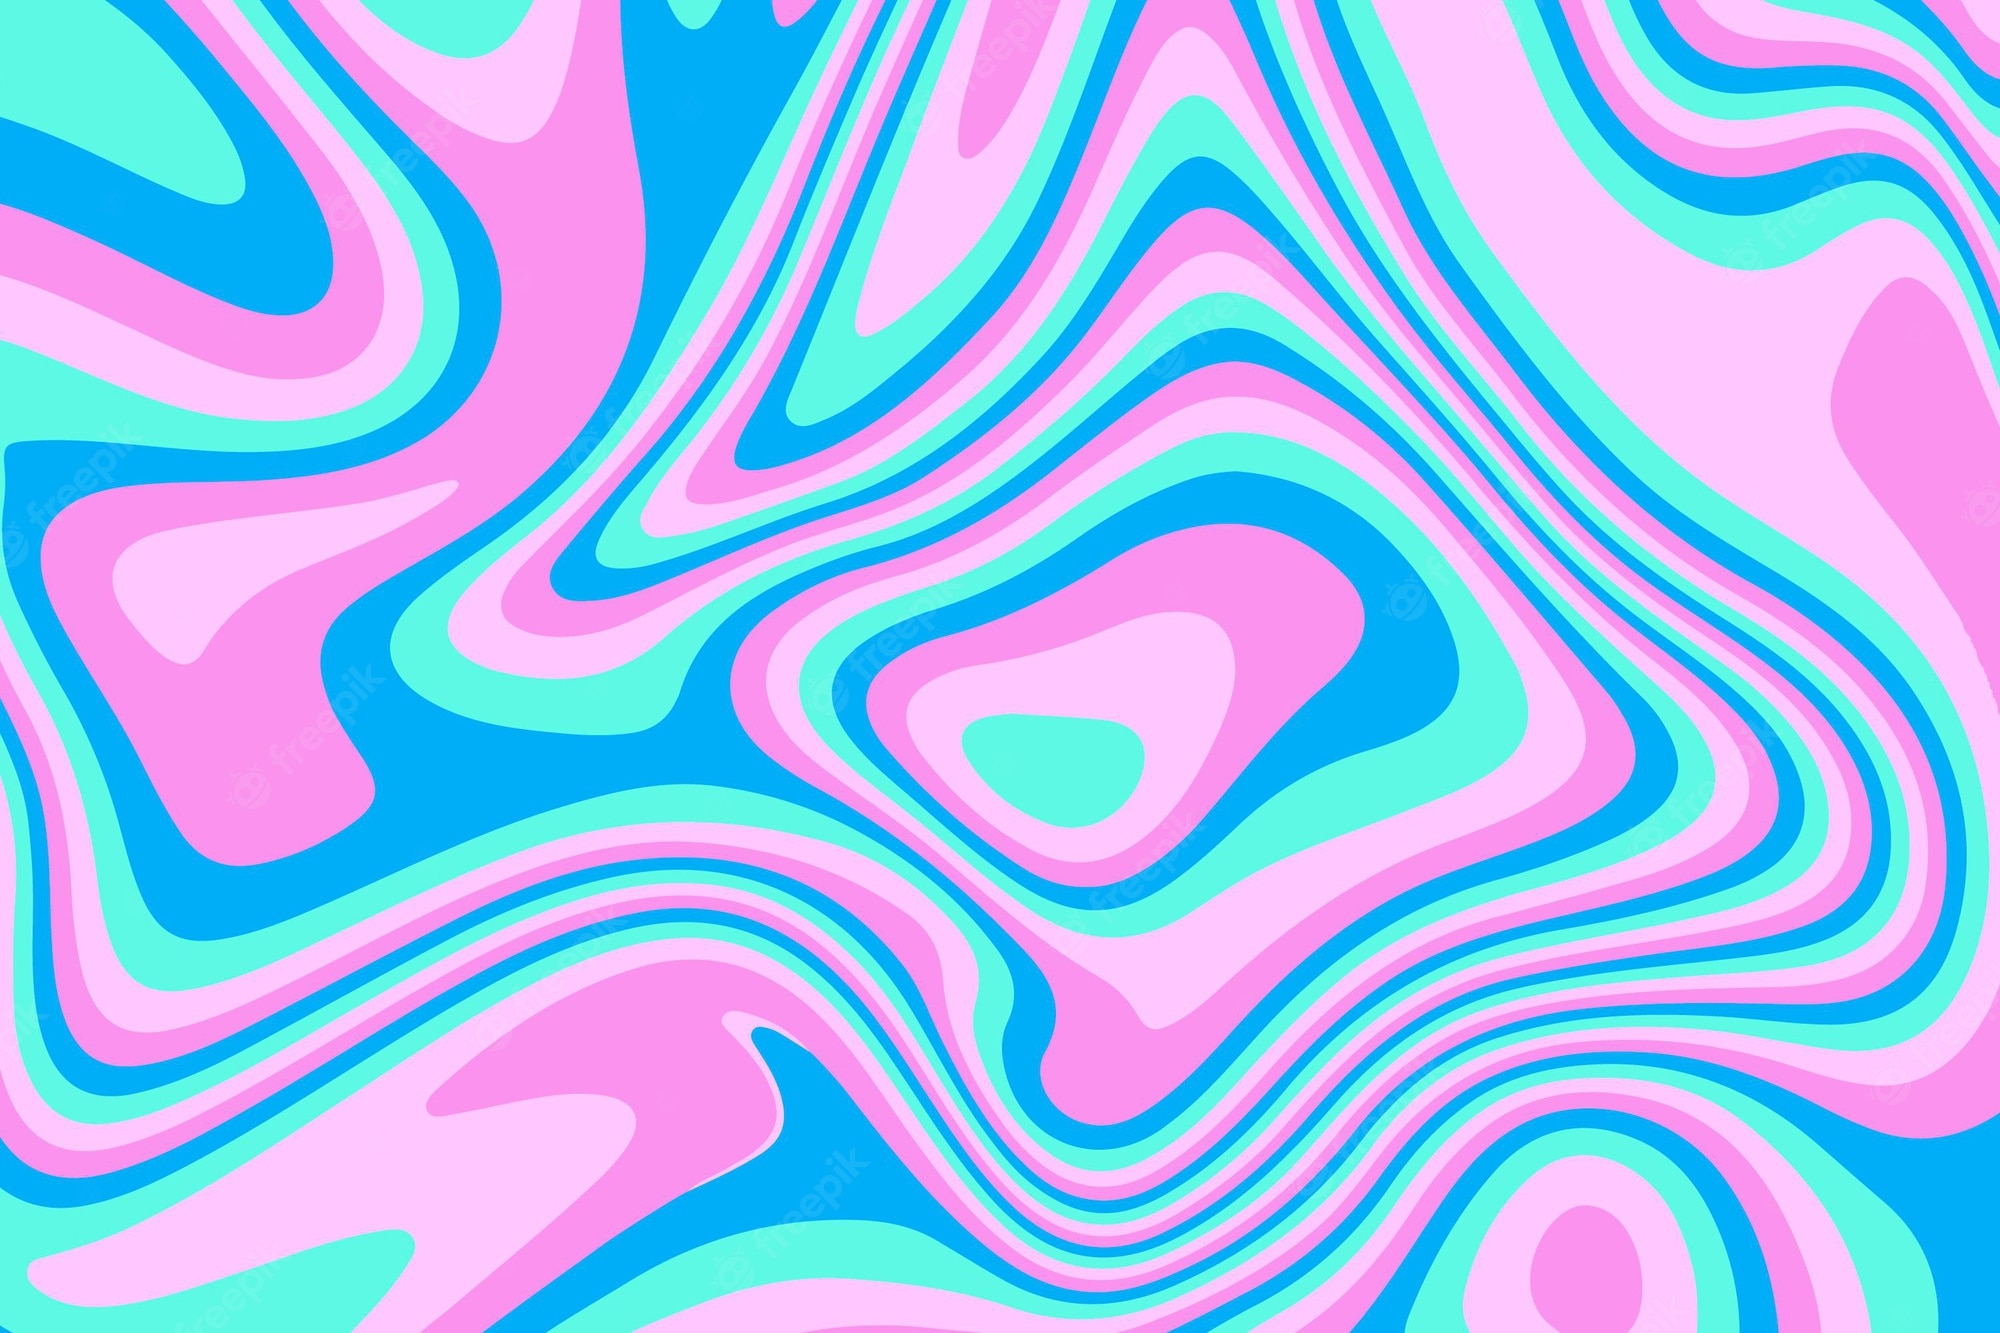 Psychedelic groovy background Image. Free Vectors, & PSD